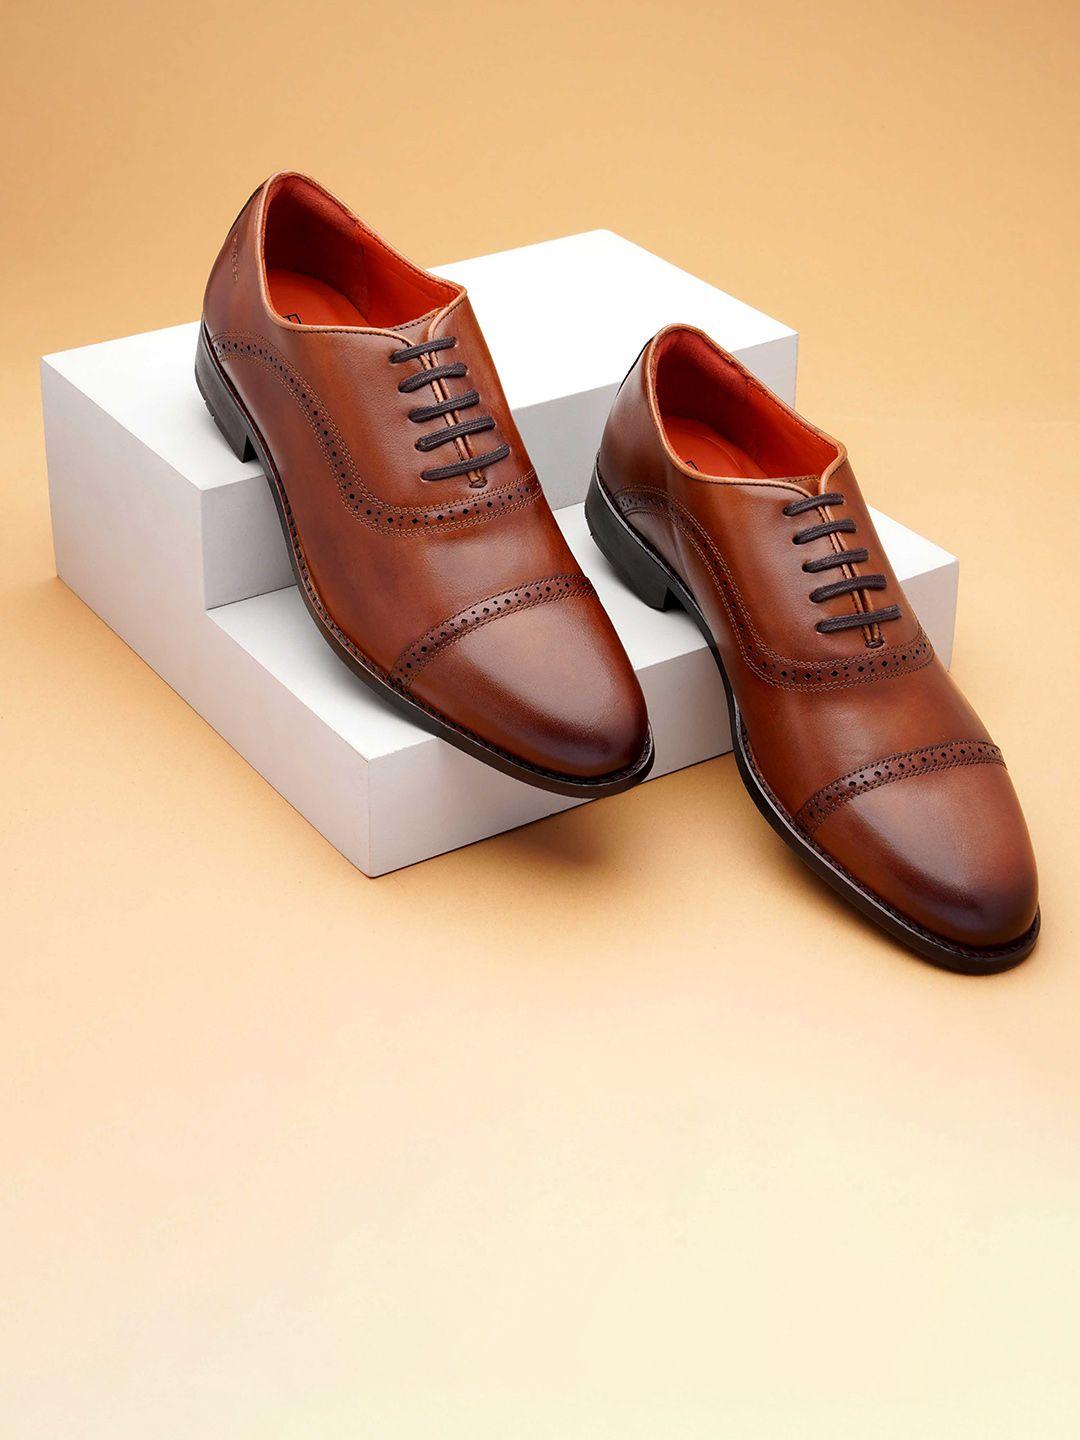 Ruosh Men Perforated Leather Formal Oxfords